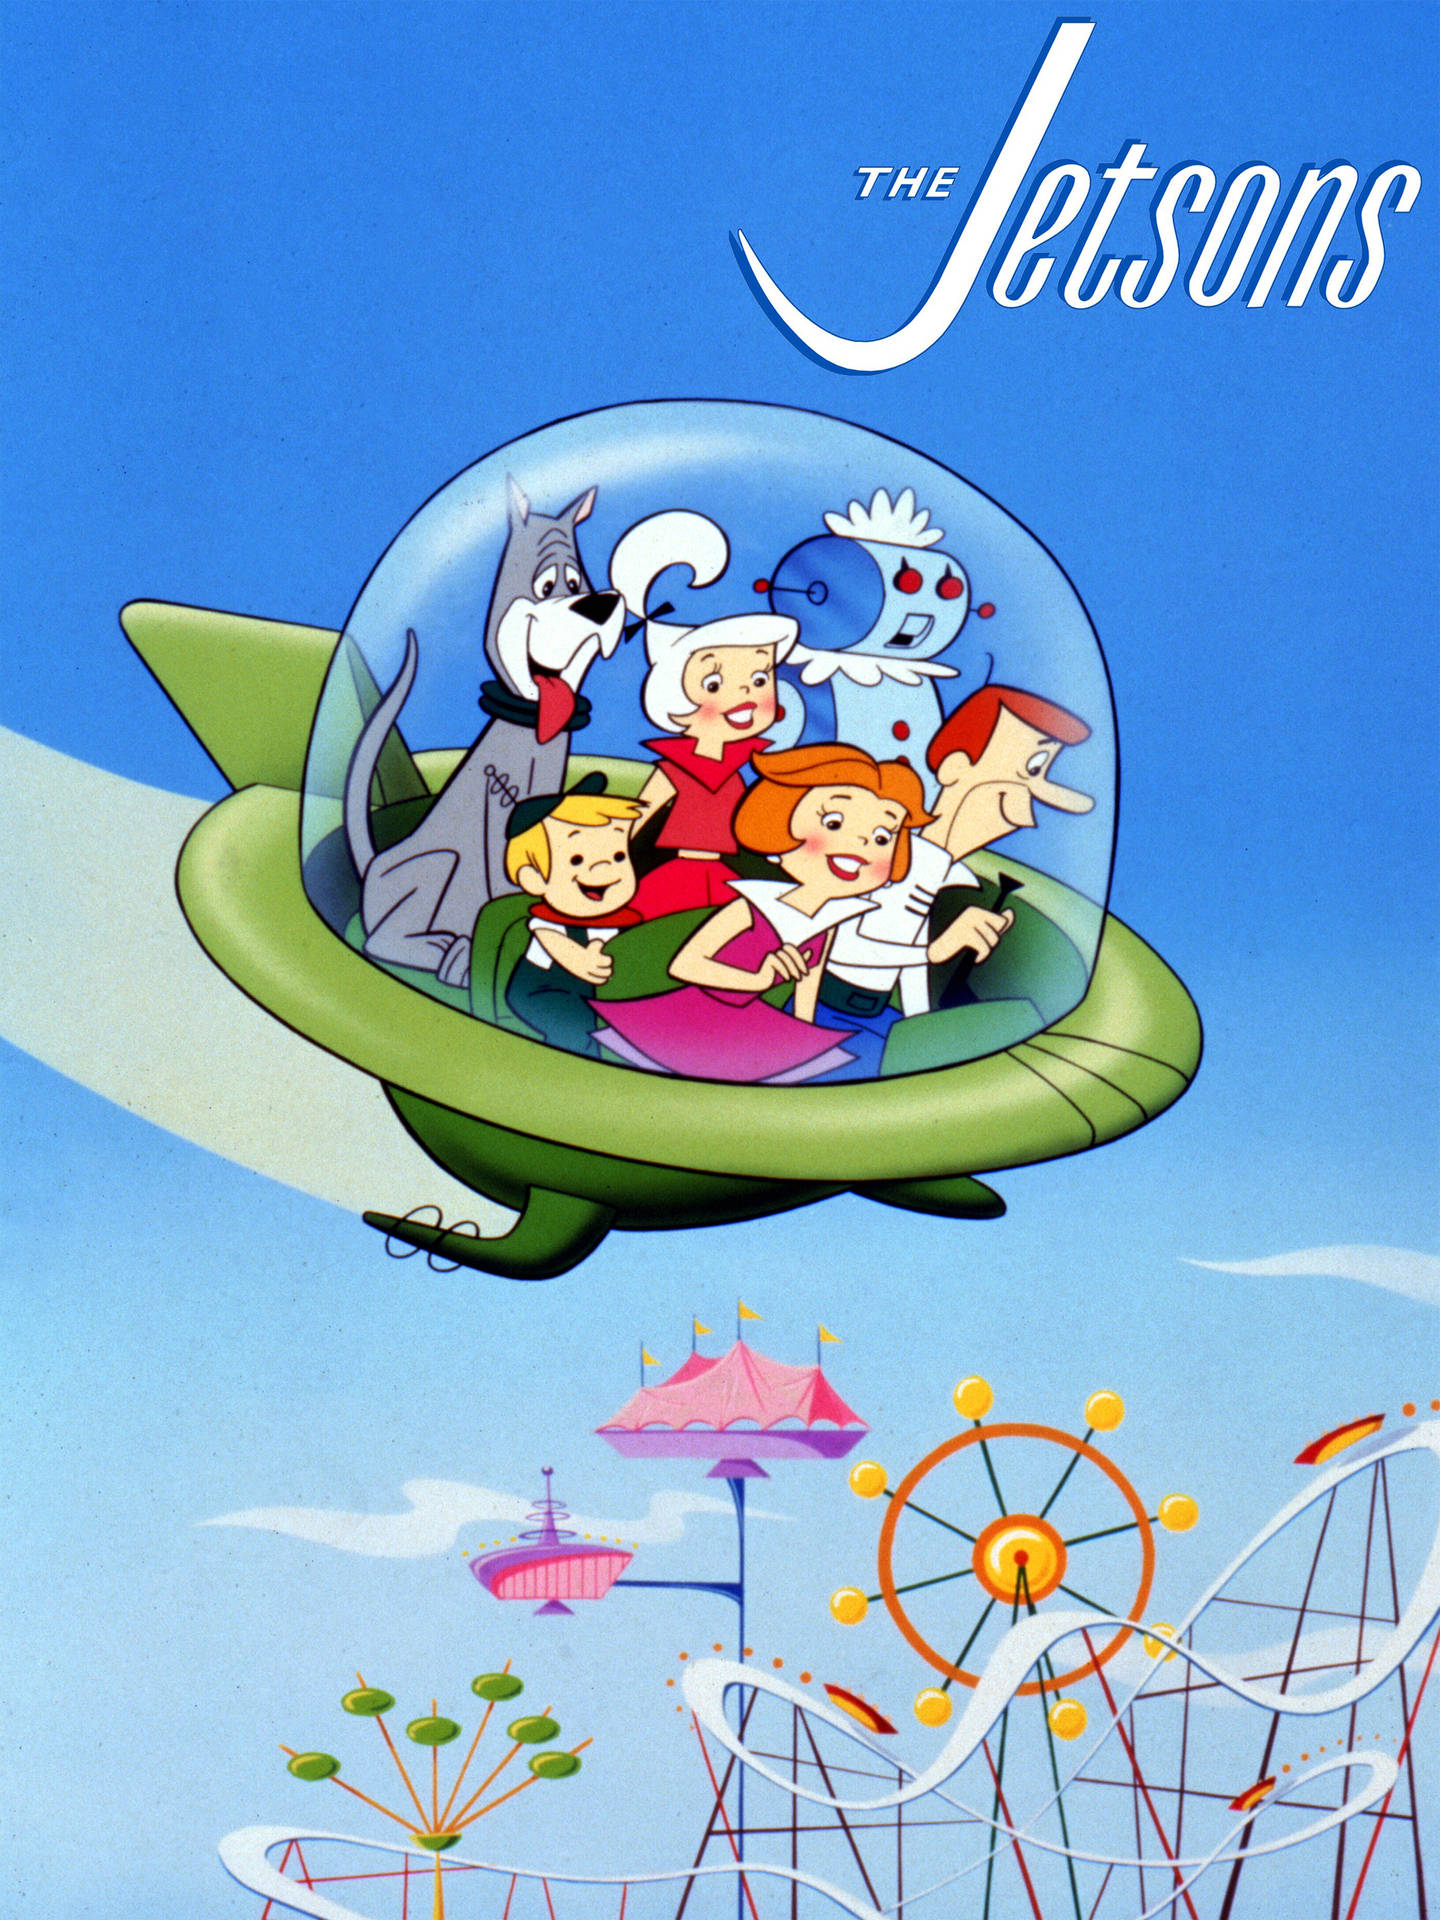 The Jetsons Background Wallpaper